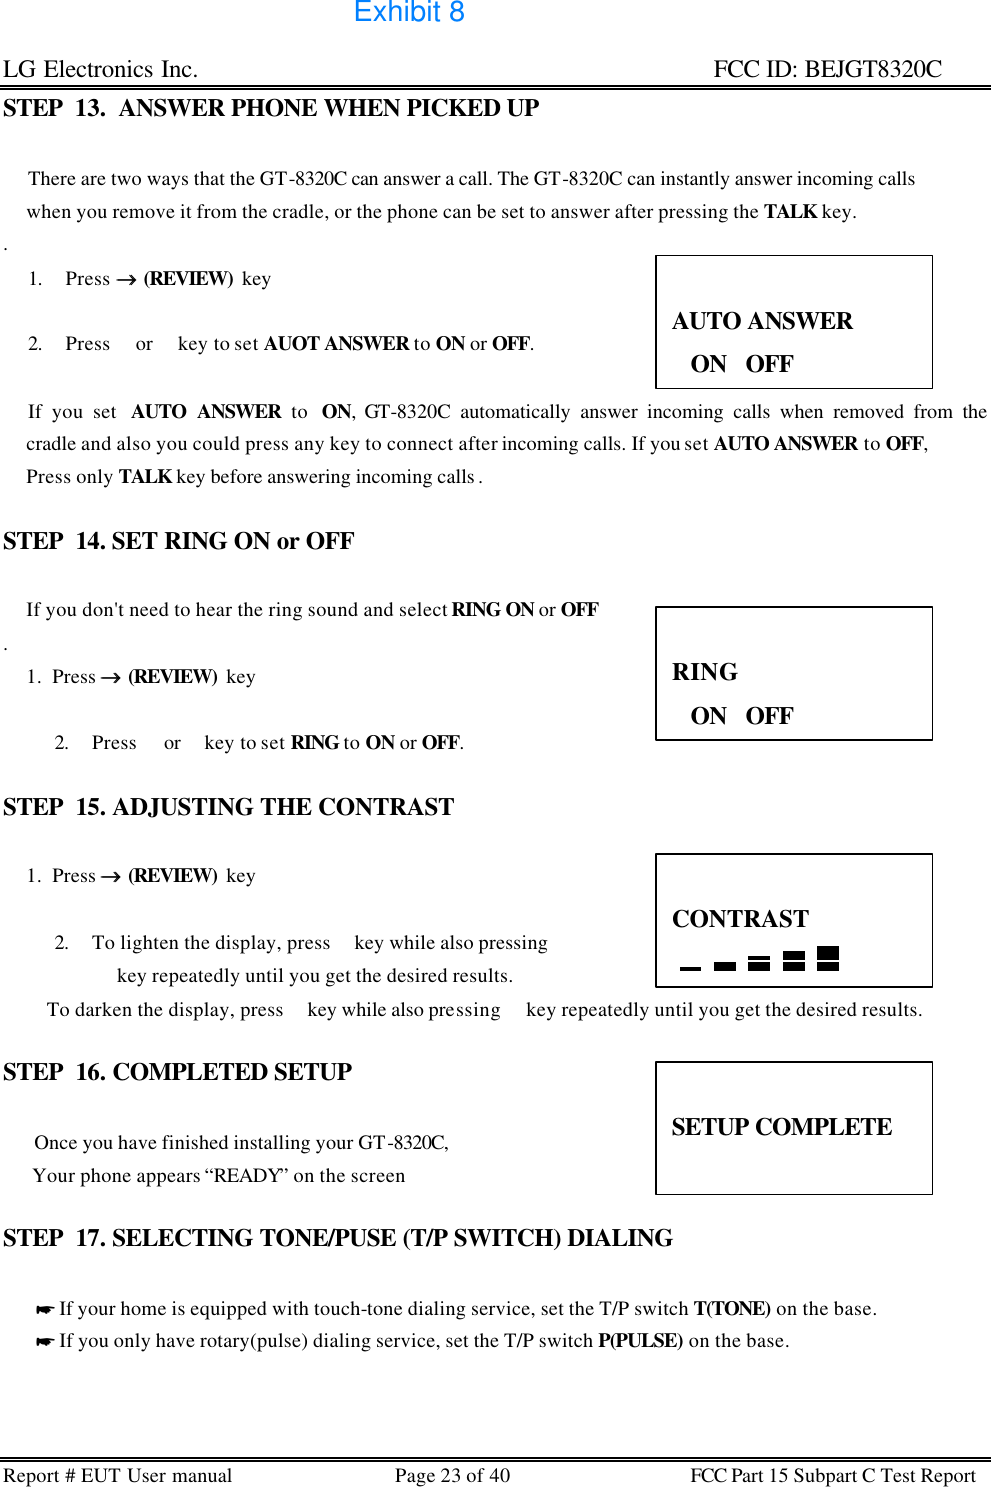 LG Electronics Inc.                                                                                                   FCC ID: BEJGT8320C Report # EUT User manual Page 23 of 40 FCC Part 15 Subpart C Test Report  STEP  13.  ANSWER PHONE WHEN PICKED UP            There are two ways that the GT-8320C can answer a call. The GT-8320C can instantly answer incoming calls       when you remove it from the cradle, or the phone can be set to answer after pressing the TALK key.        .  1. Press →→ (REVIEW)  key   2. Press  or  key to set AUOT ANSWER to ON or OFF.             If you set  AUTO ANSWER to  ON, GT-8320C automatically answer incoming calls when removed from the      cradle and also you could press any key to connect after incoming calls. If you set AUTO ANSWER to OFF,       Press only TALK key before answering incoming calls .   STEP  14. SET RING ON or OFF               If you don&apos;t need to hear the ring sound and select RING ON or OFF .       1.  Press →→ (REVIEW)  key   2. Press  or  key to set RING to ON or OFF.  STEP  15. ADJUSTING THE CONTRAST          1.  Press →→ (REVIEW)  key   2. To lighten the display, press  key while also pressing   key repeatedly until you get the desired results.          To darken the display, press  key while also pressing  key repeatedly until you get the desired results.  STEP  16. COMPLETED SETUP       Once you have finished installing your GT-8320C,        Your phone appears “READY” on the screen  STEP  17. SELECTING TONE/PUSE (T/P SWITCH) DIALING         * If your home is equipped with touch-tone dialing service, set the T/P switch T(TONE) on the base.        * If you only have rotary(pulse) dialing service, set the T/P switch P(PULSE) on the base.     AUTO ANSWER ON   OFF  RING ON   OFF  CONTRAST   SETUP COMPLETE  Exhibit 8